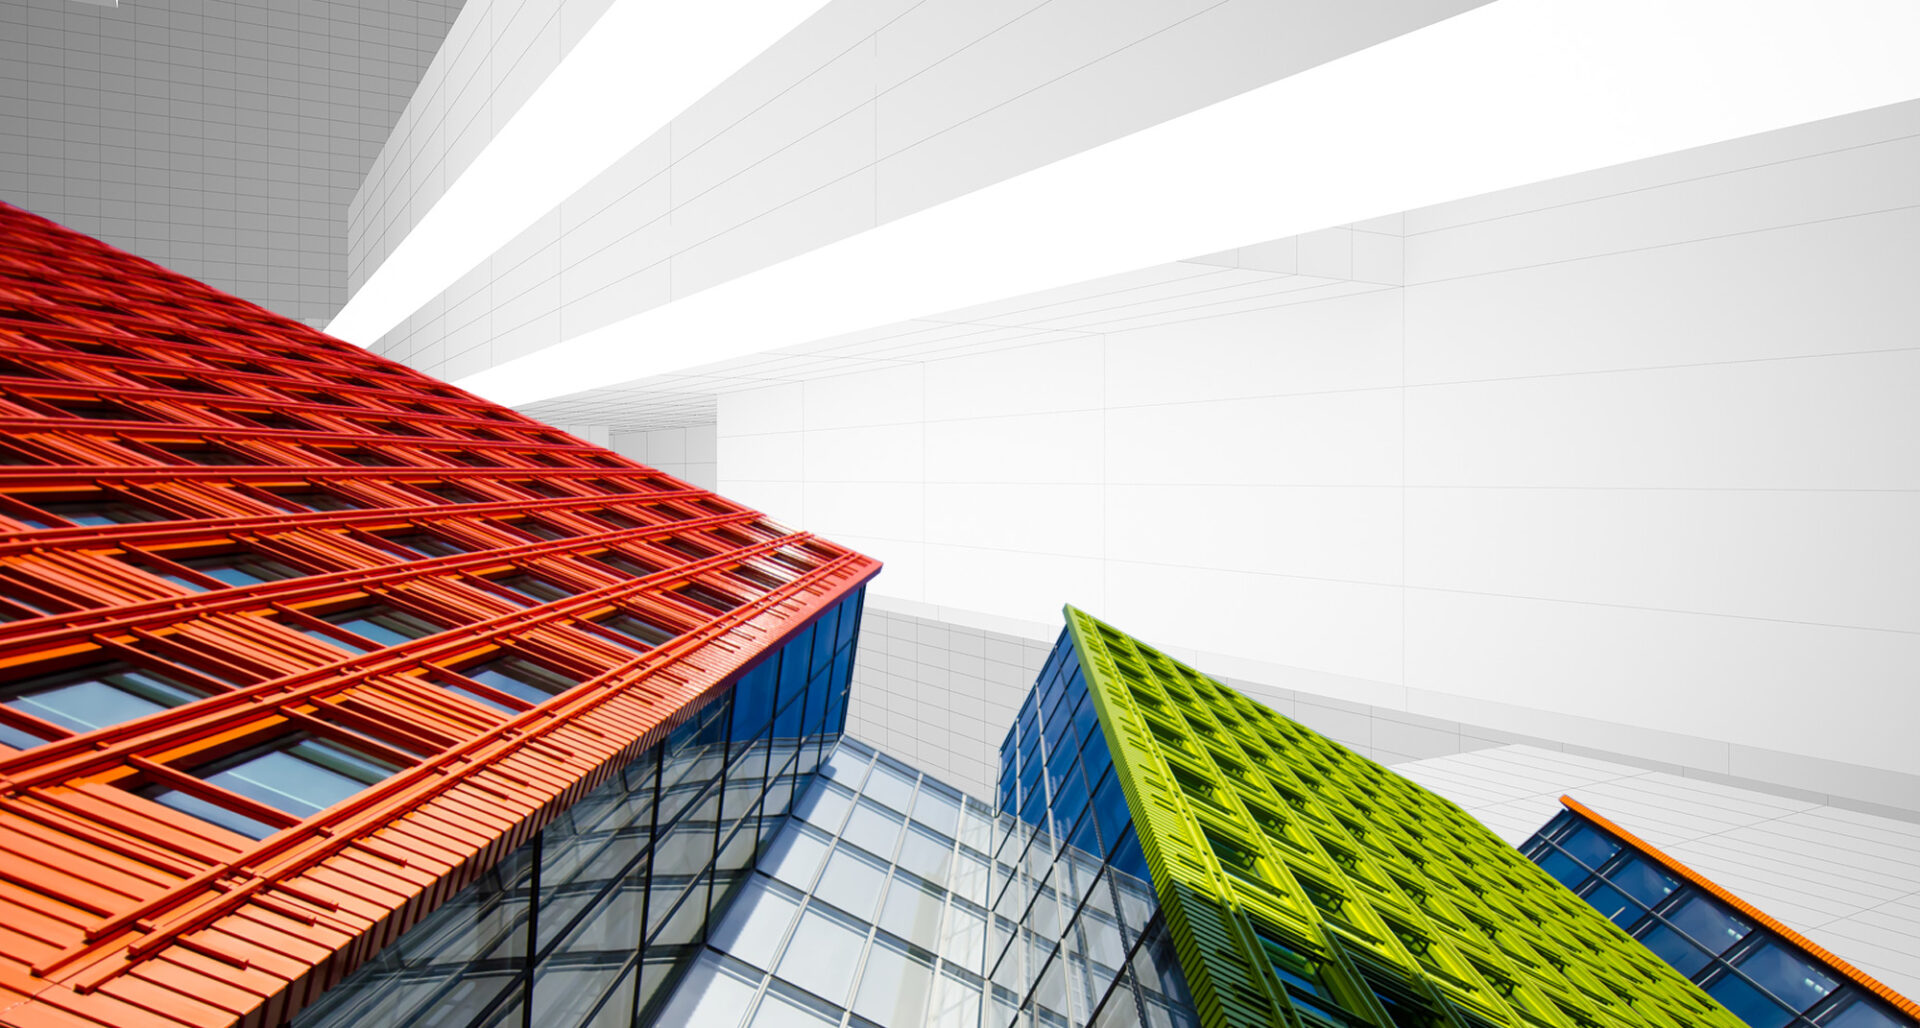 A view of three different colored buildings from below.